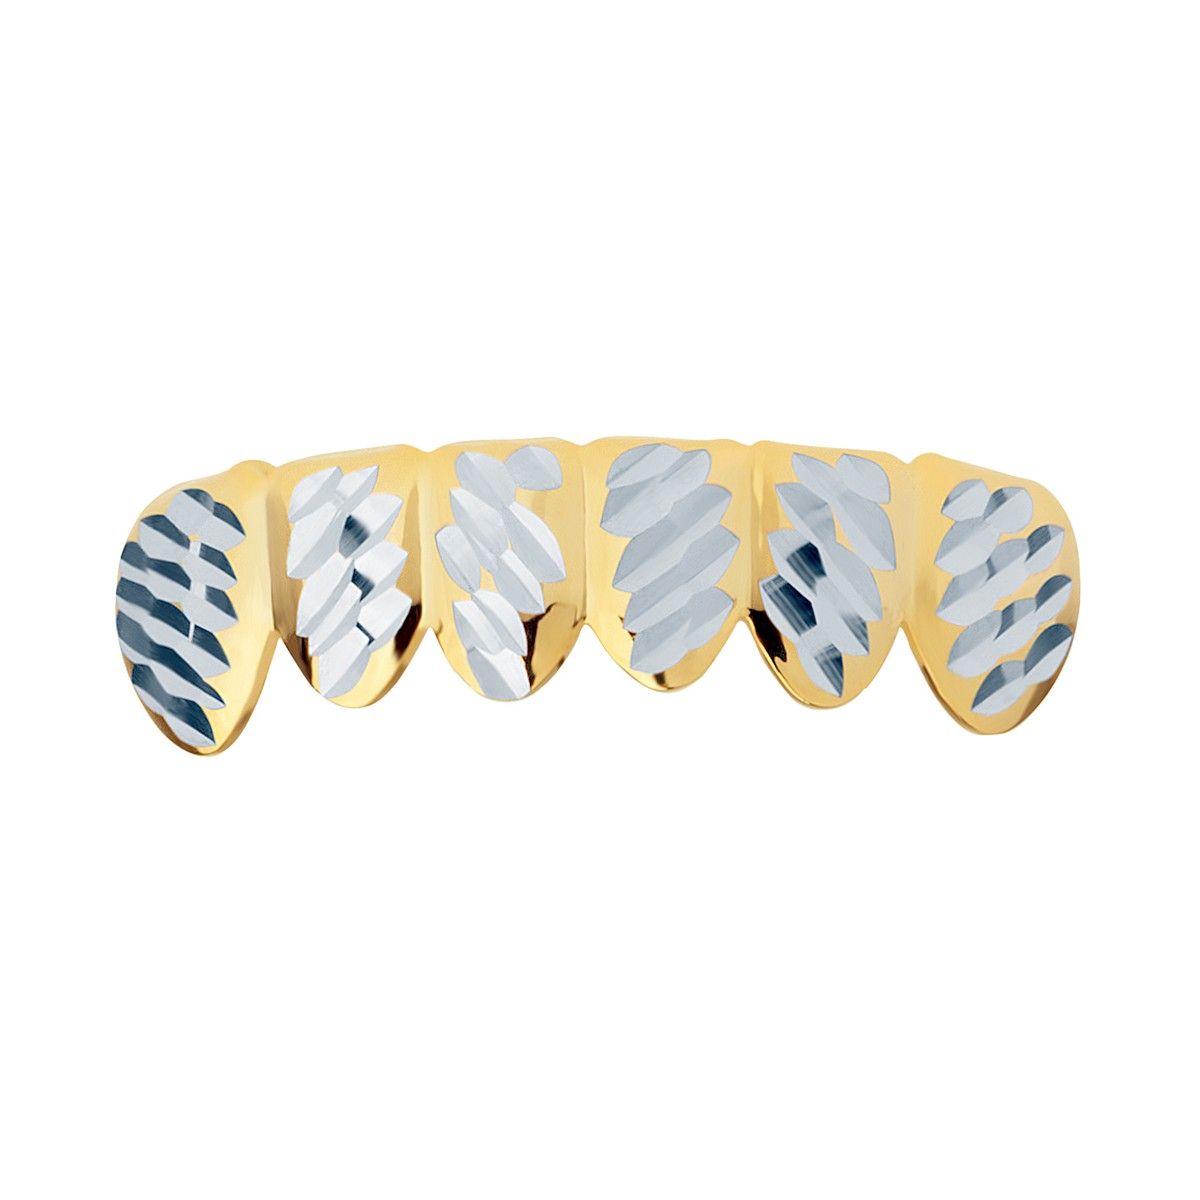 Gold Grillz – One size fits all – Diamond Cut IV – Bottom